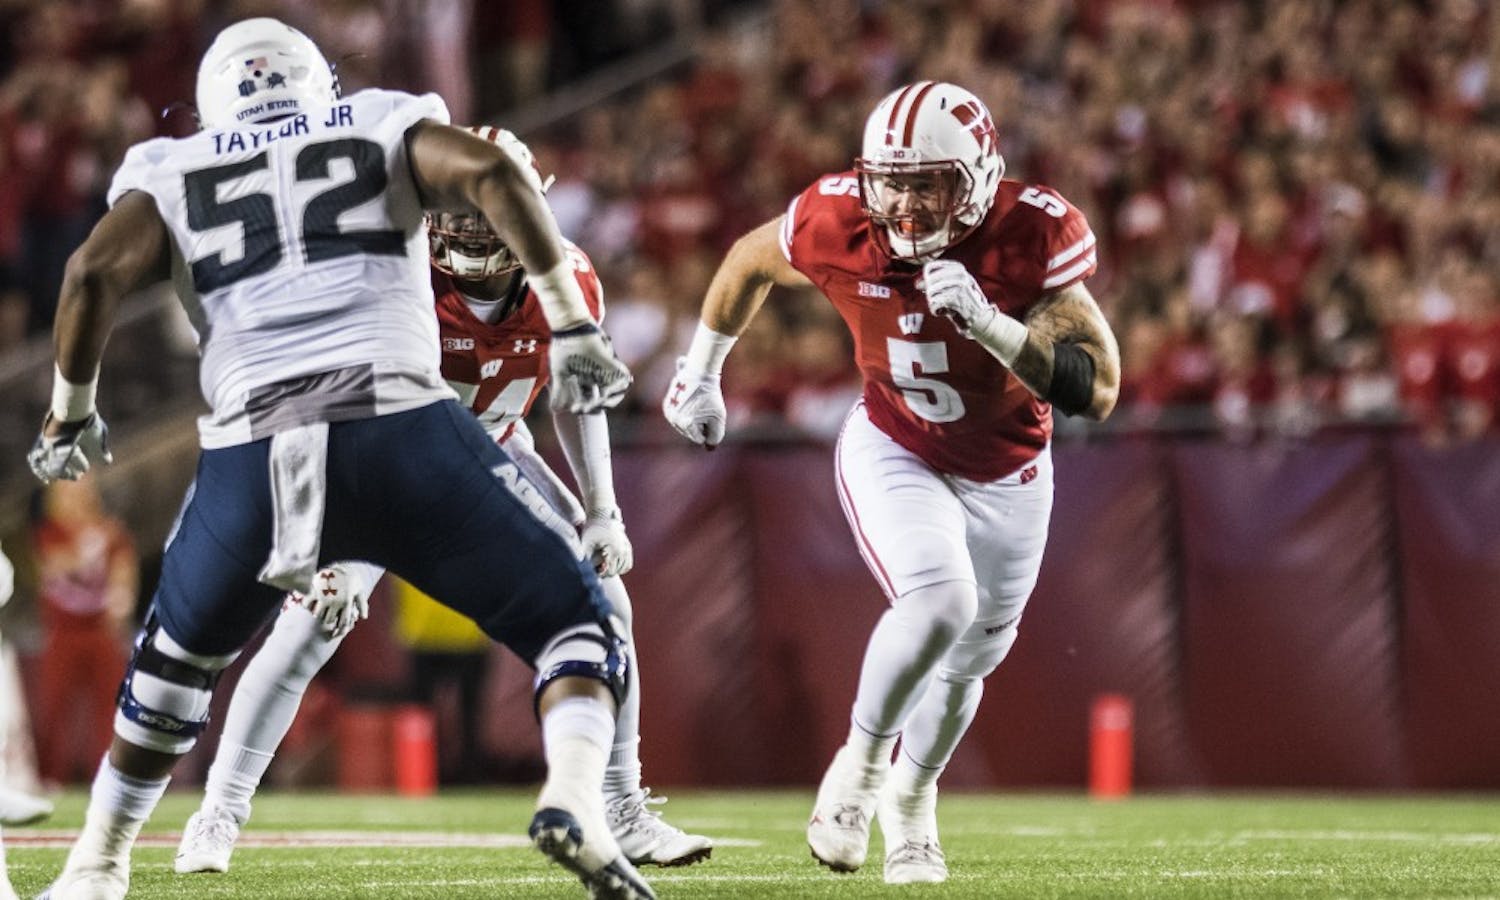 Garret Dooley and the Badgers' defense hopes&nbsp;to knock off Iowa and continue their undefeated season on Saturday.